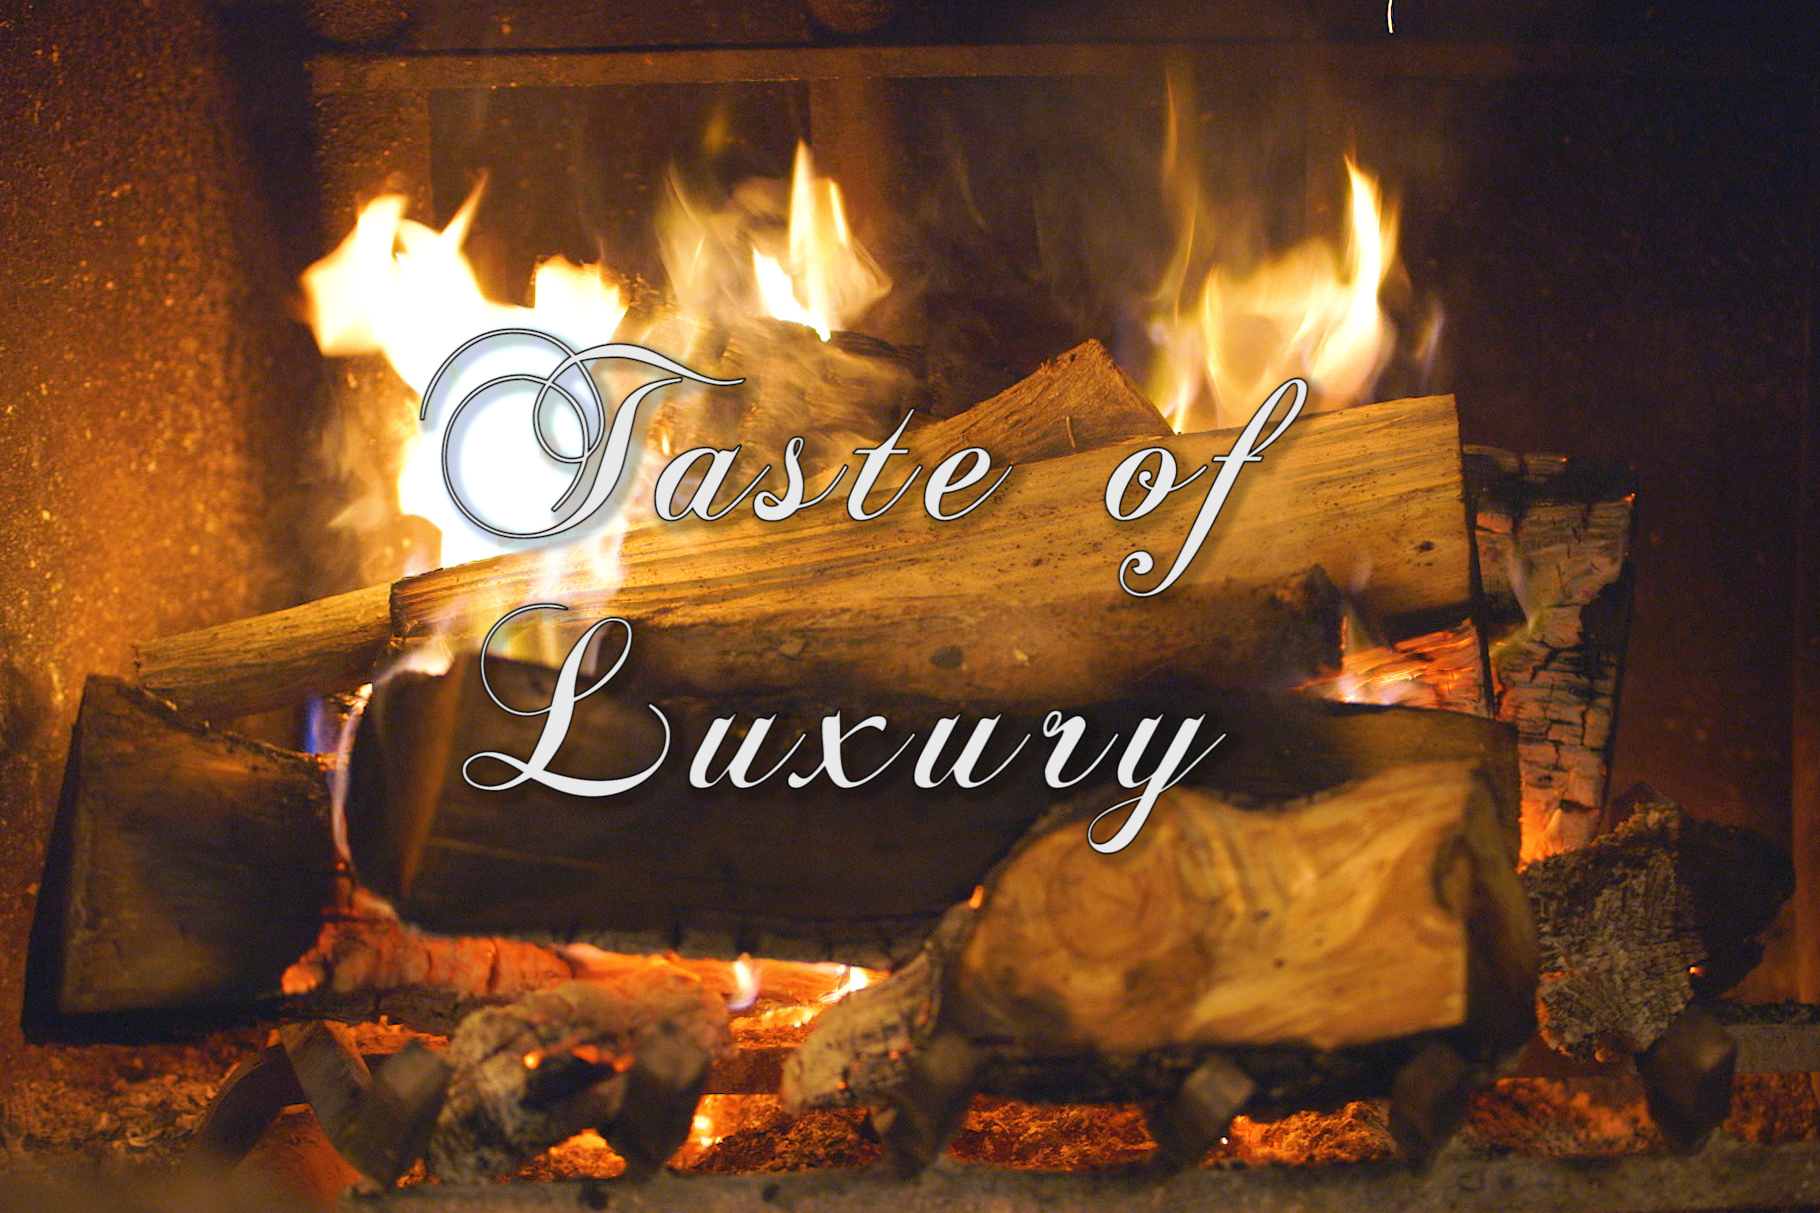 The words “Taste of Luxury” in white script front superimposed over a close-up photo of a wood fire burning in a fireplace.